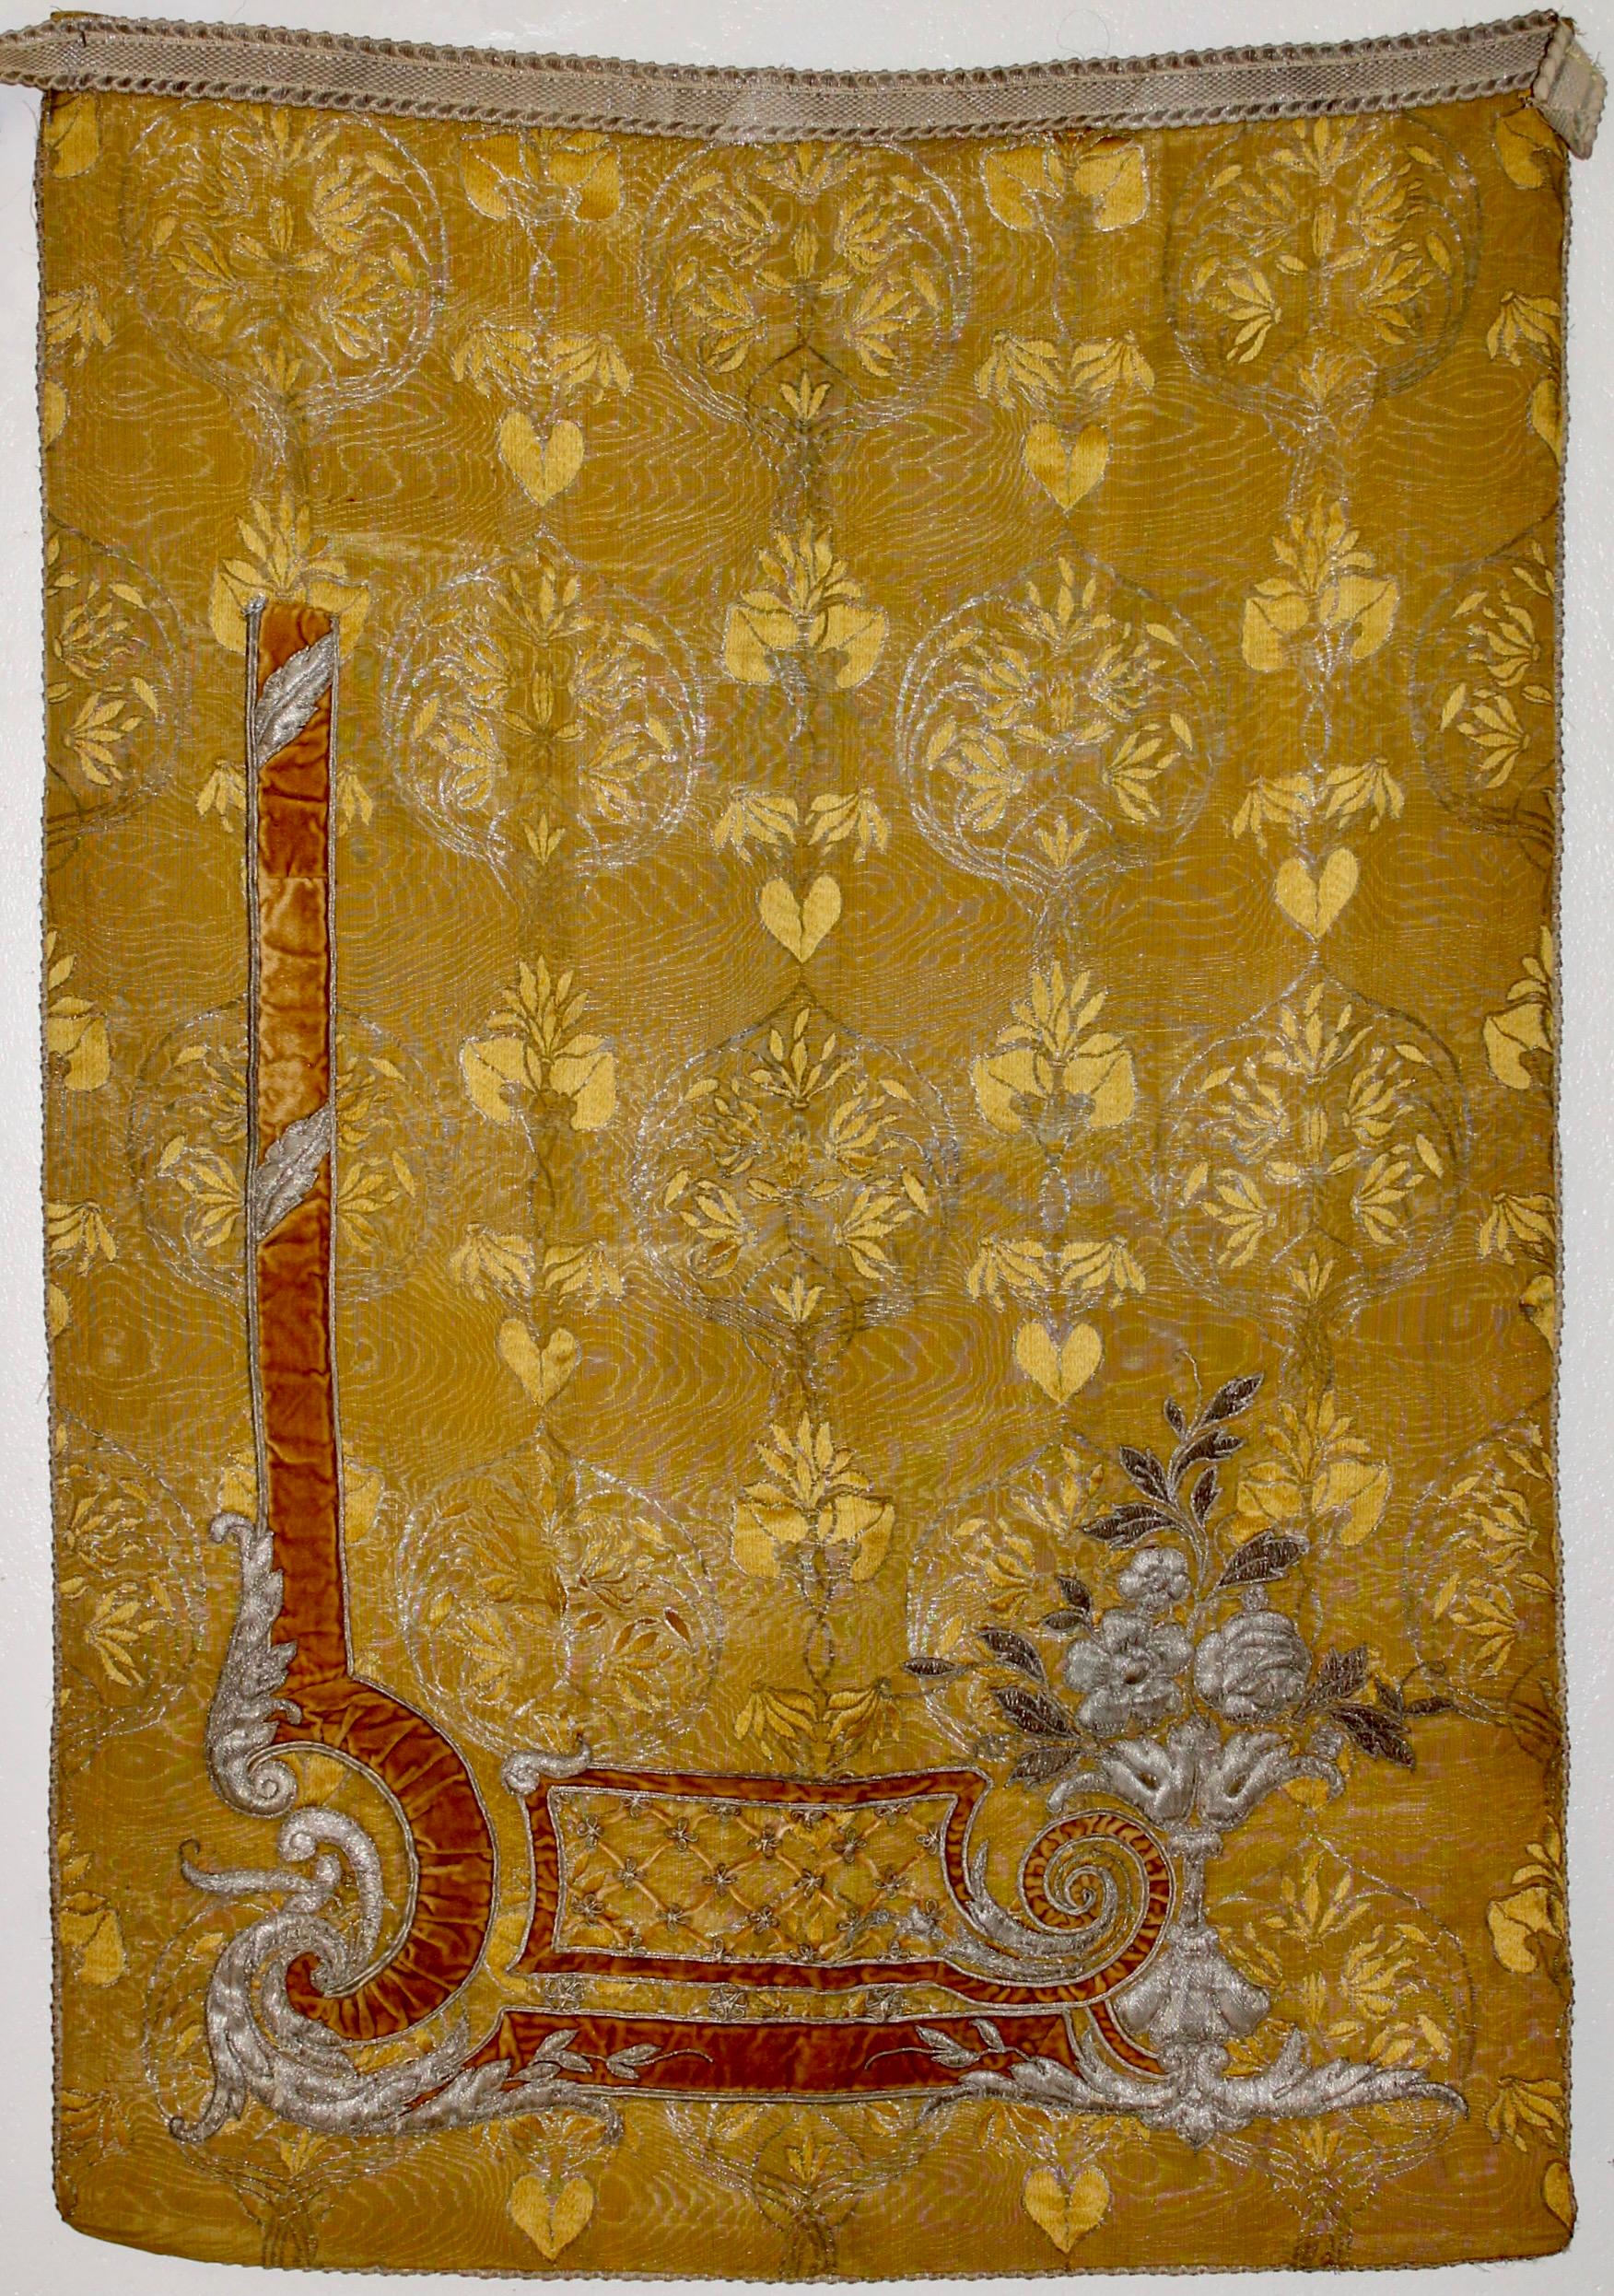 Intricately embroidered with 'turn of century' motifs in silk and velvet on golden yellow moire silk. 